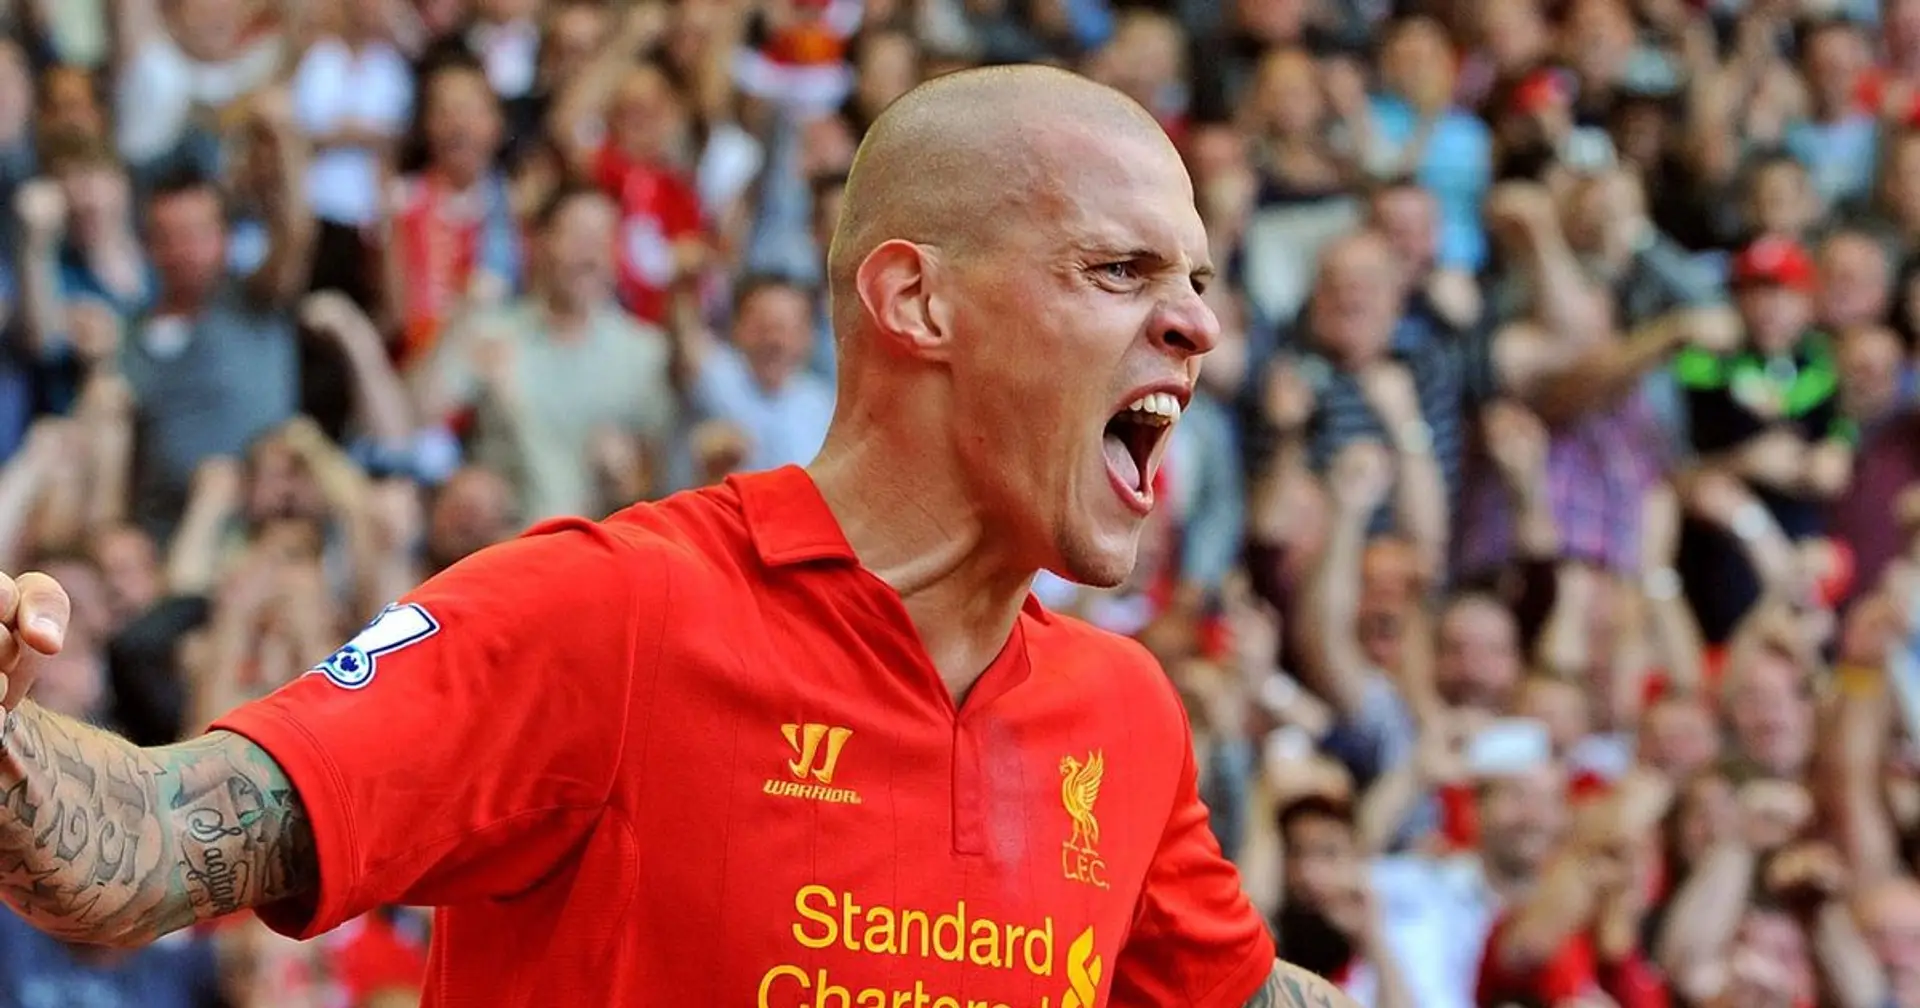 'Still putting in work after all these years' - Reds rejoice as Skrtel helps beat Man United...again!